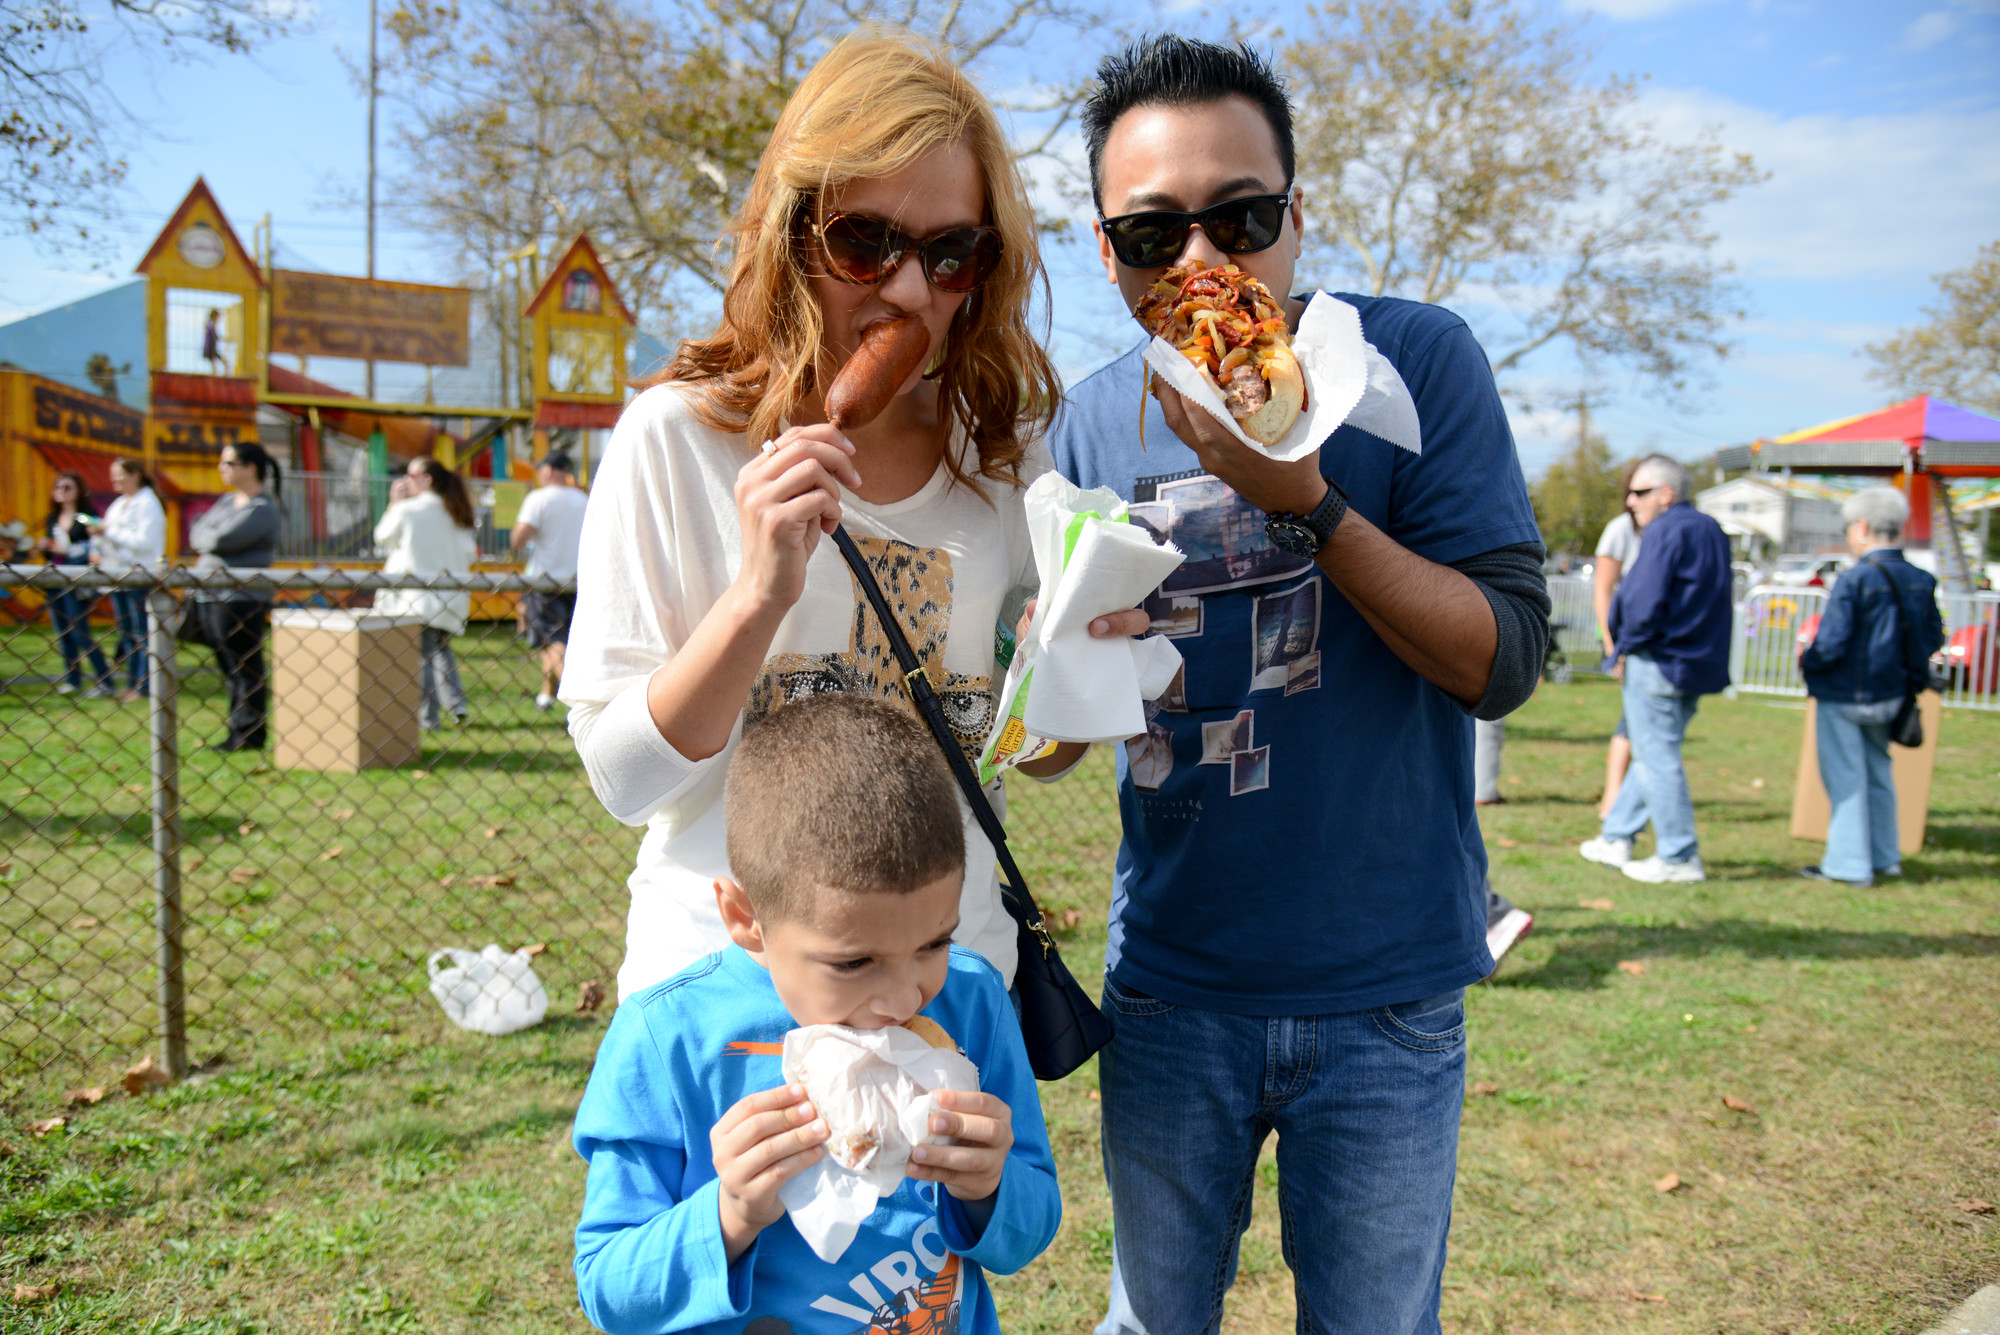 Katia, Marcos and Leo Mendez enjoyed what they saw, and tasted, at the Oceanside Chamber of Commerce fair.